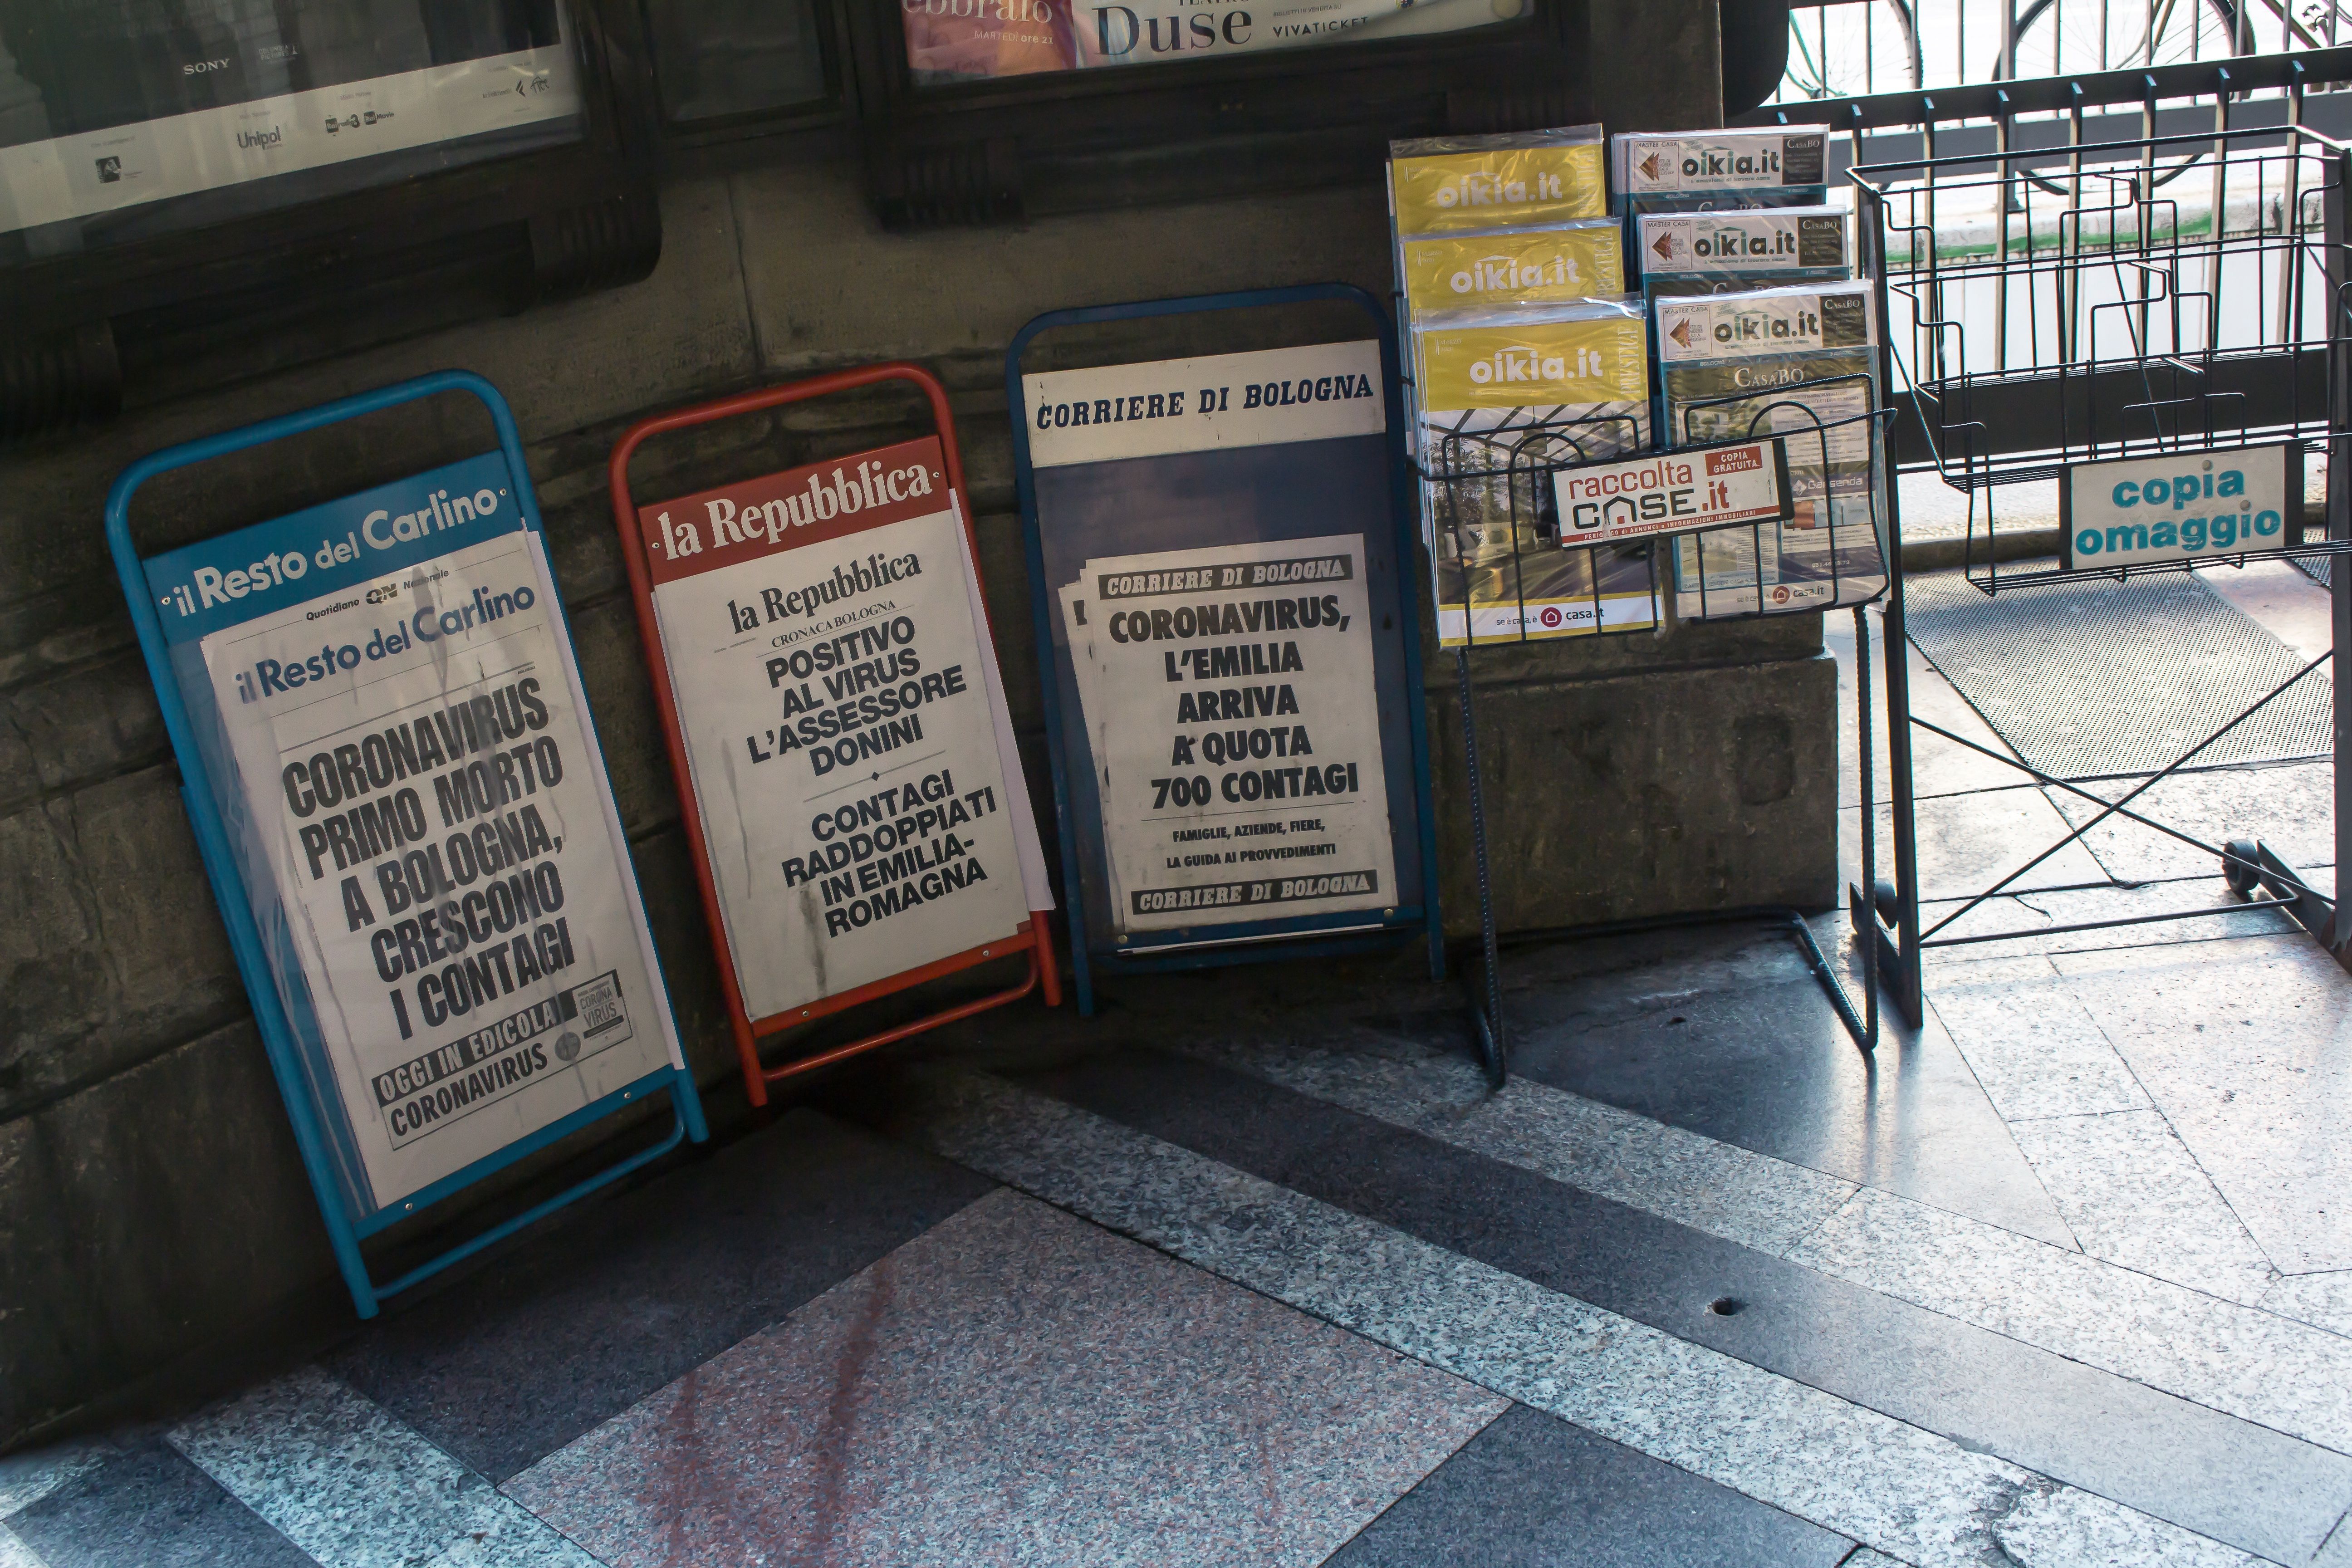 Newsstands in Bologna, Italy show headlines referring to the COVID-19 pandemic. Image by Angela M. Benivegna. Italy, 2020.